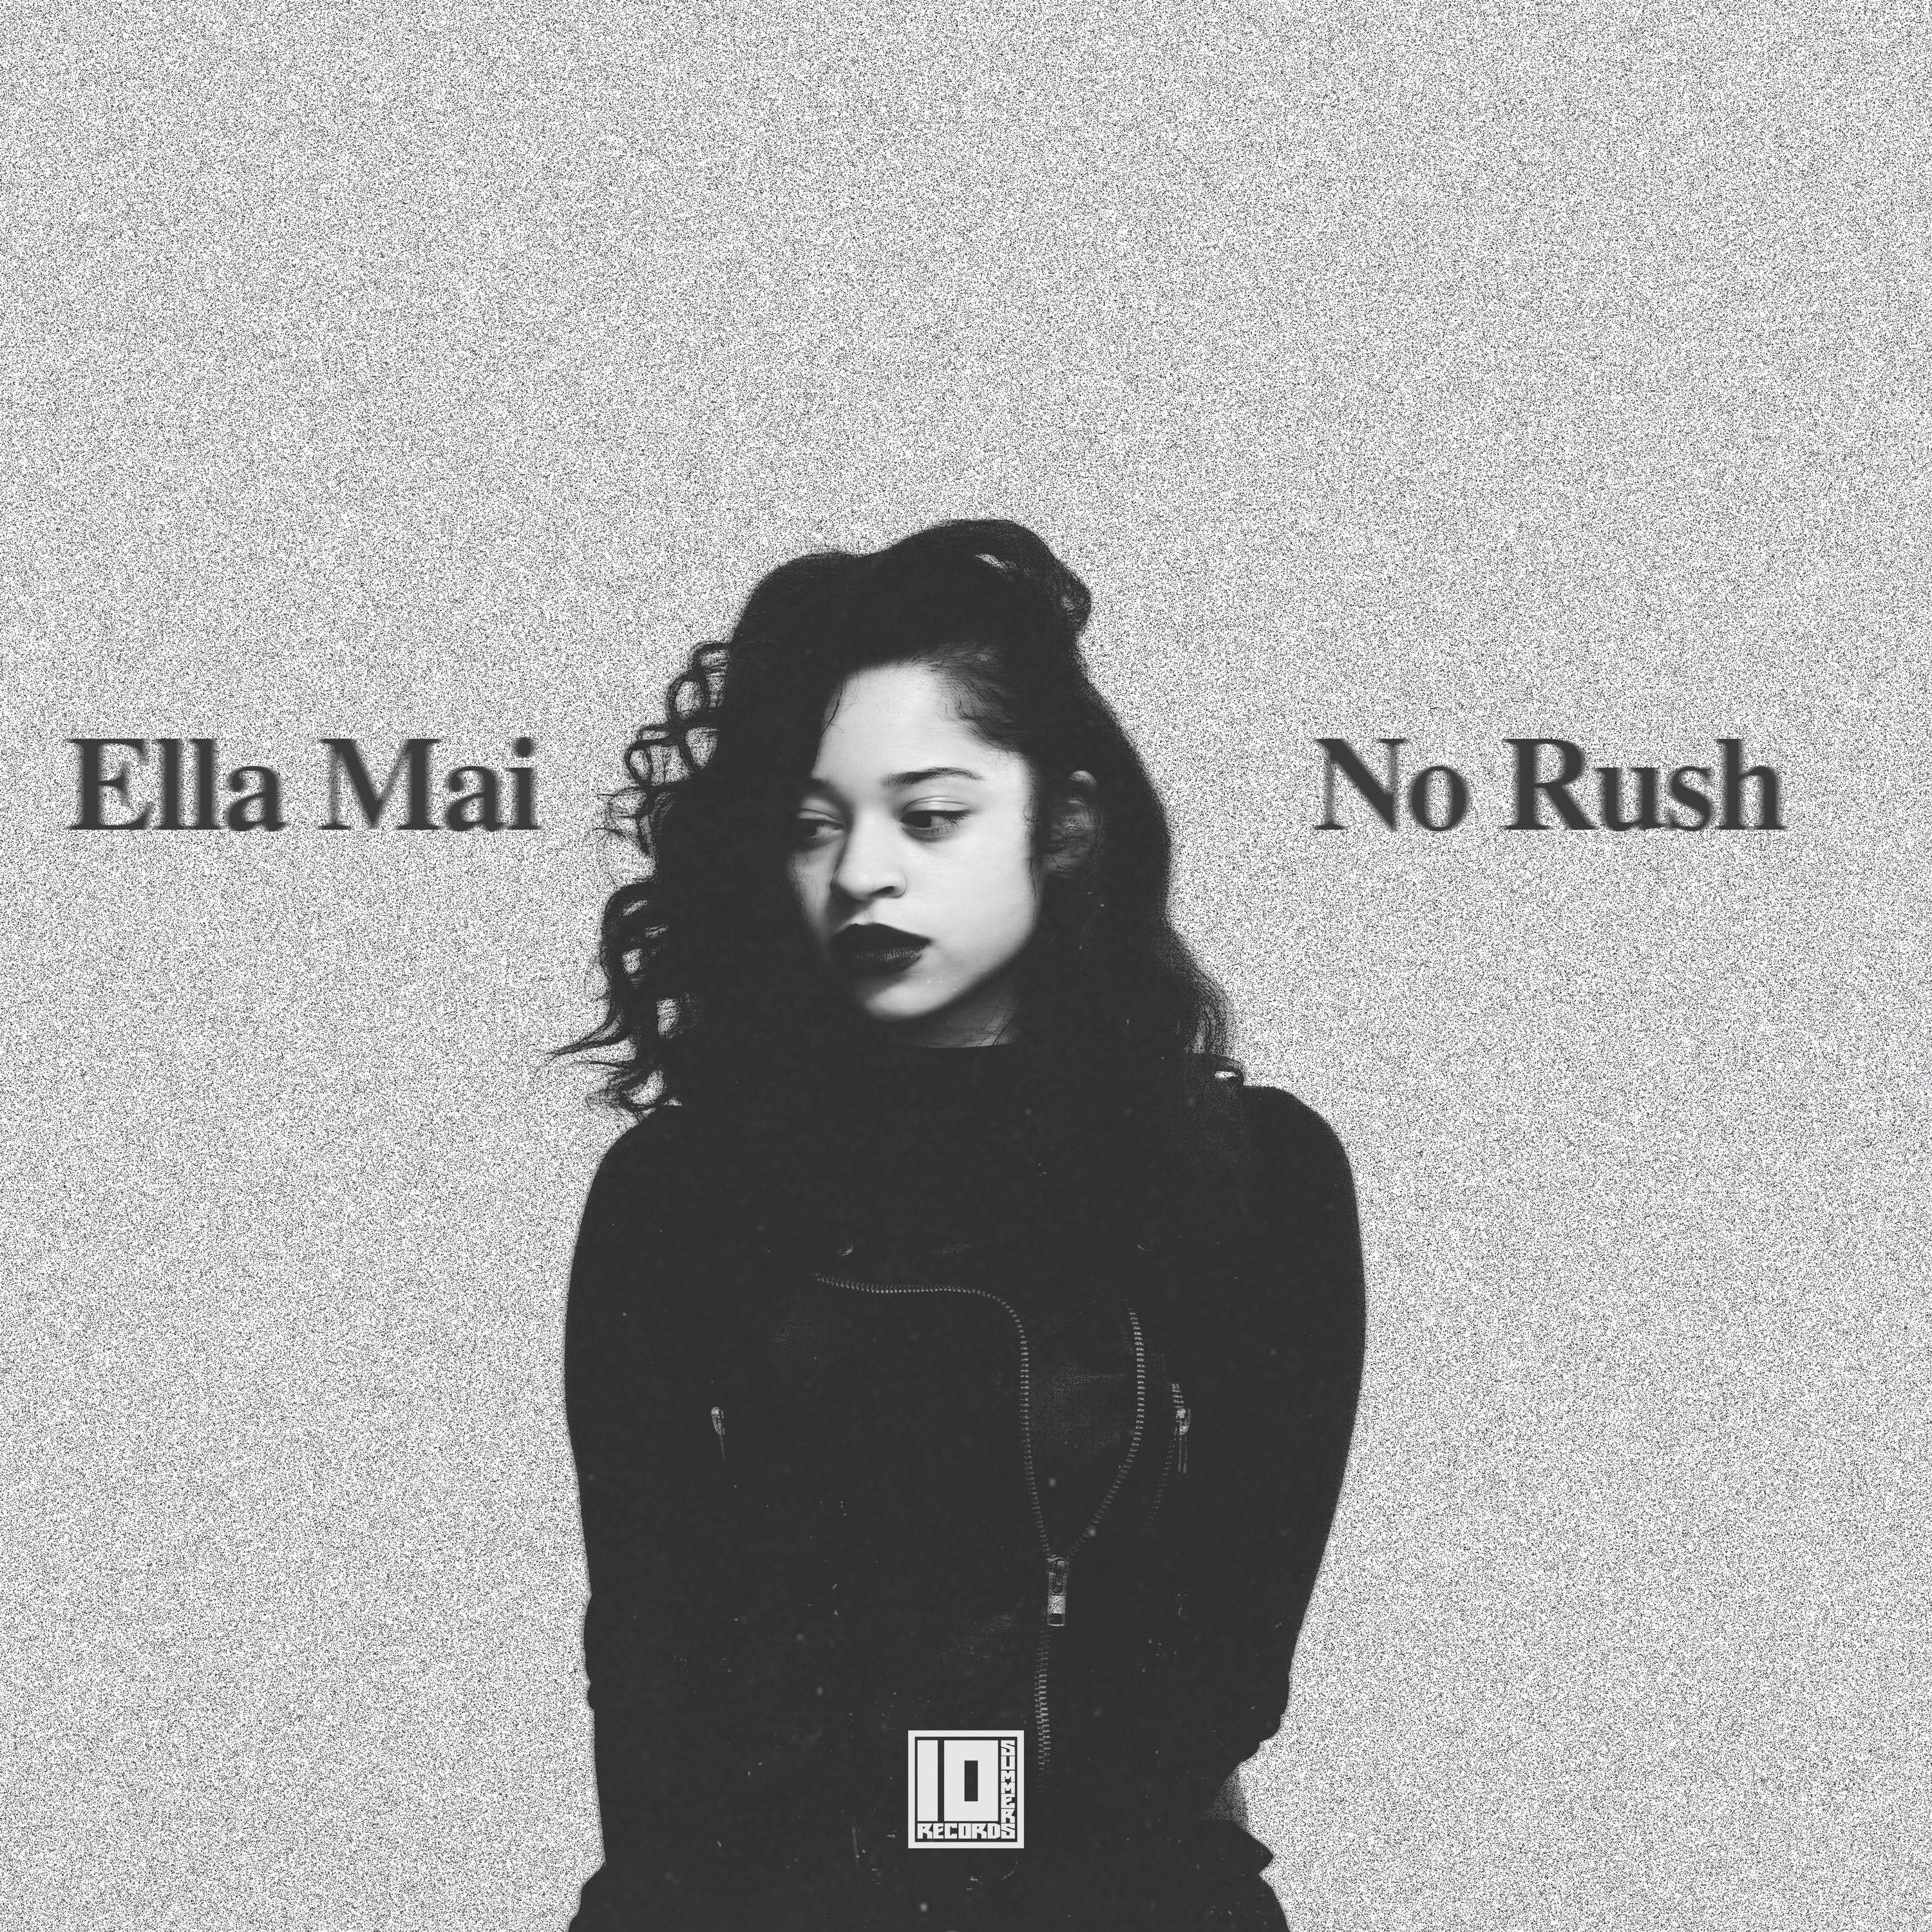 the song that introduced me to Ella Mai. This is the song that